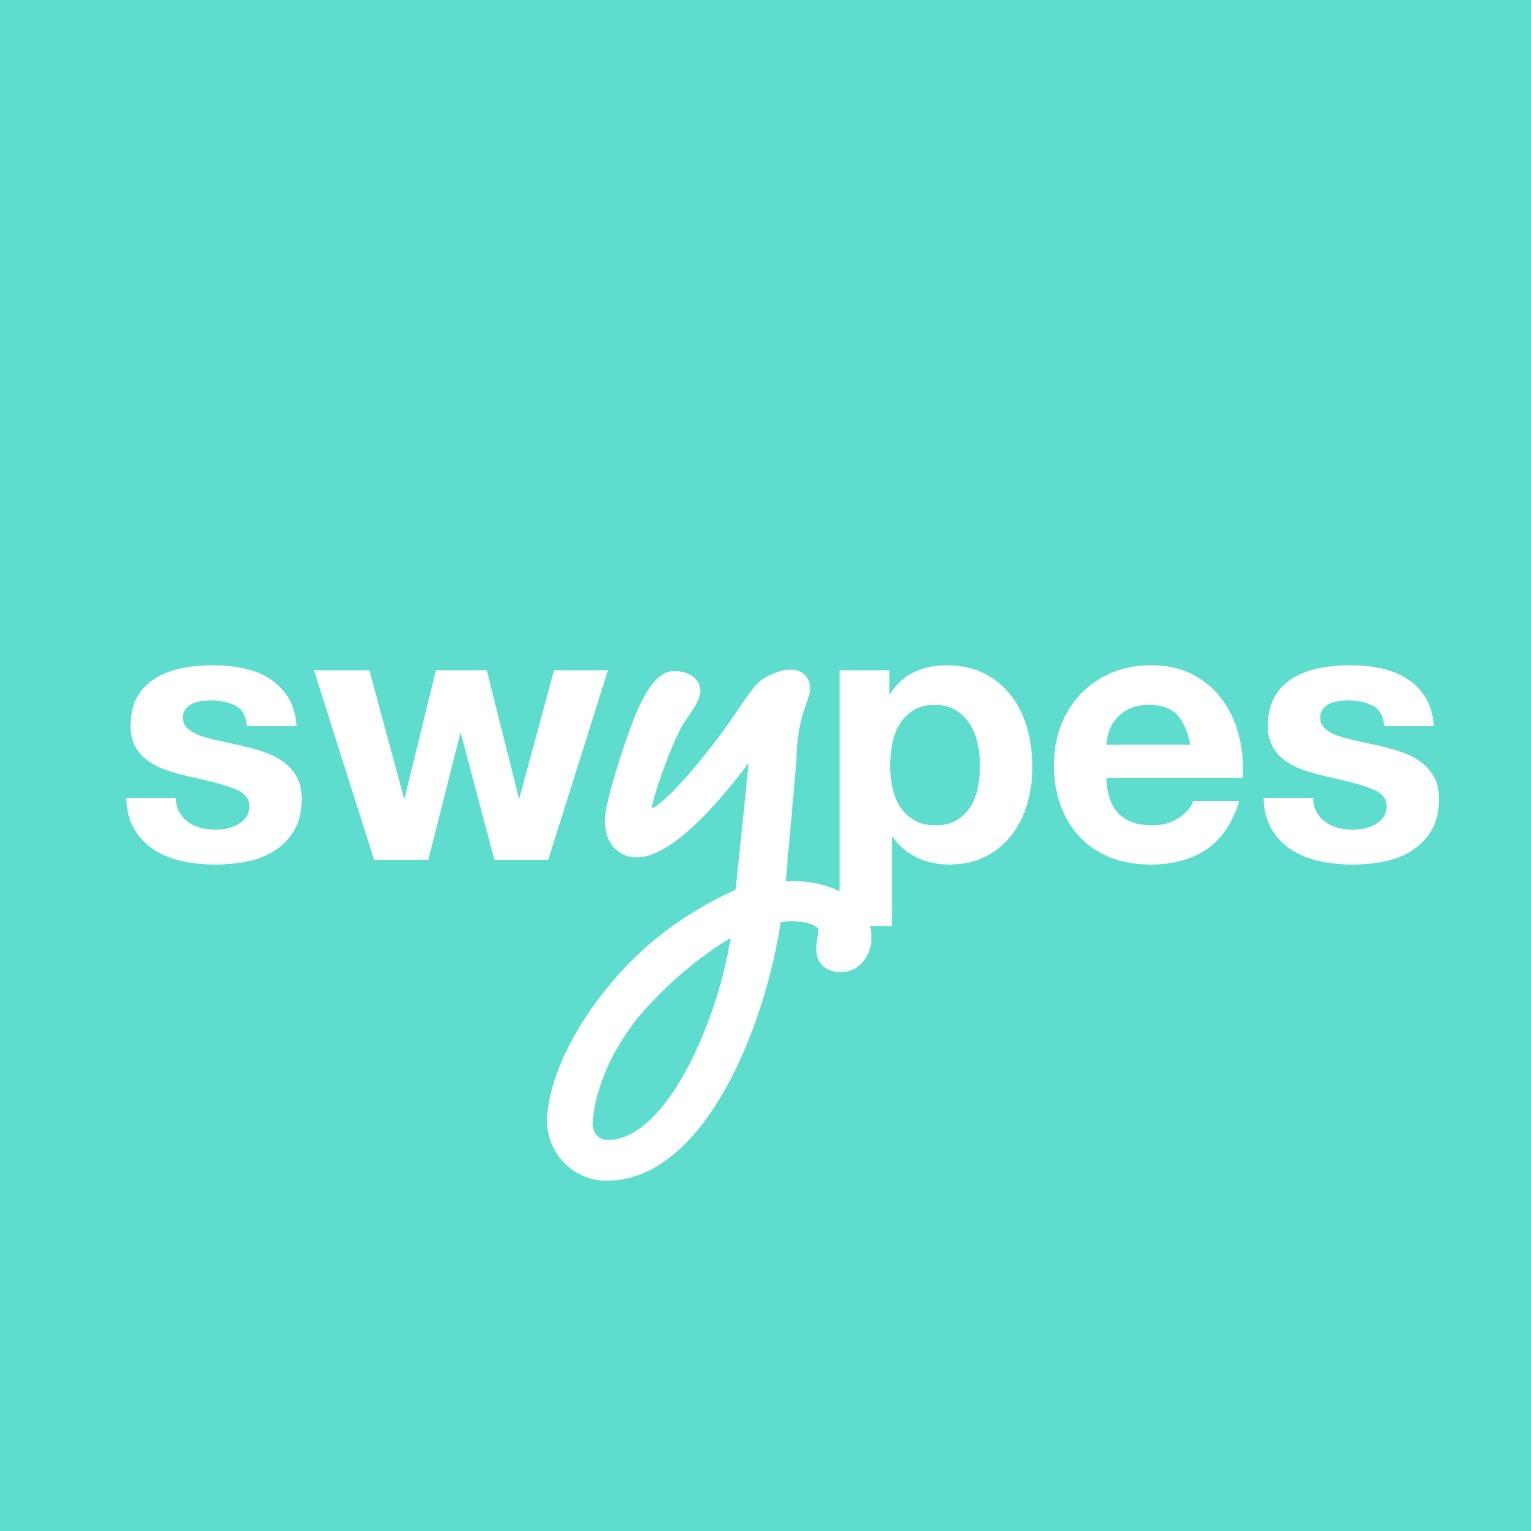 Swypes featured logo